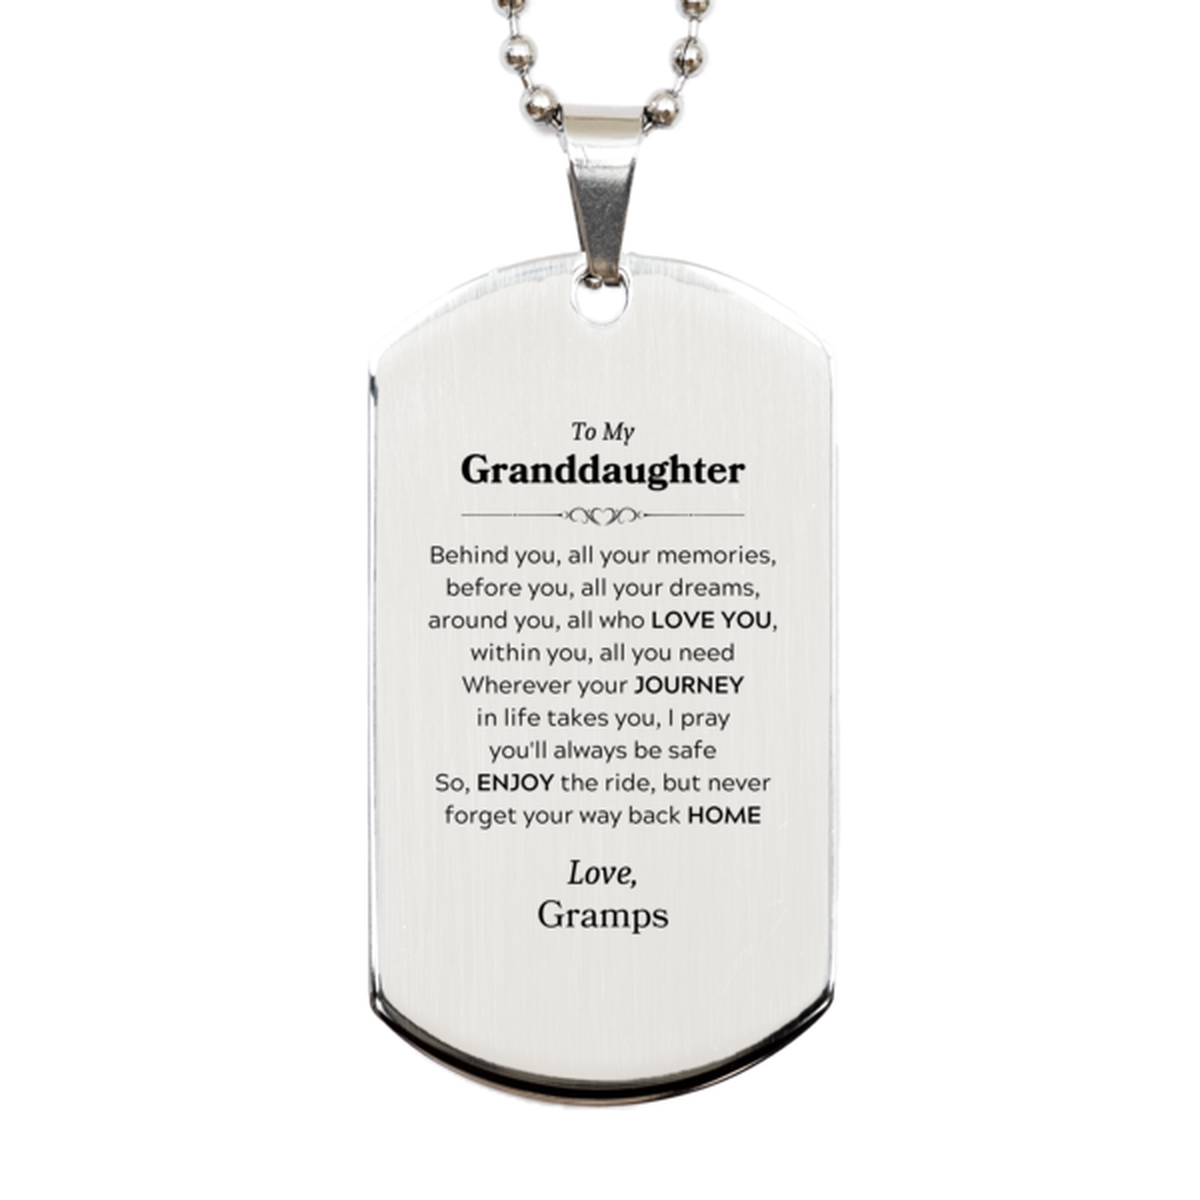 To My Granddaughter Graduation Gifts from Gramps, Granddaughter Silver Dog Tag Christmas Birthday Gifts for Granddaughter Behind you, all your memories, before you, all your dreams. Love, Gramps